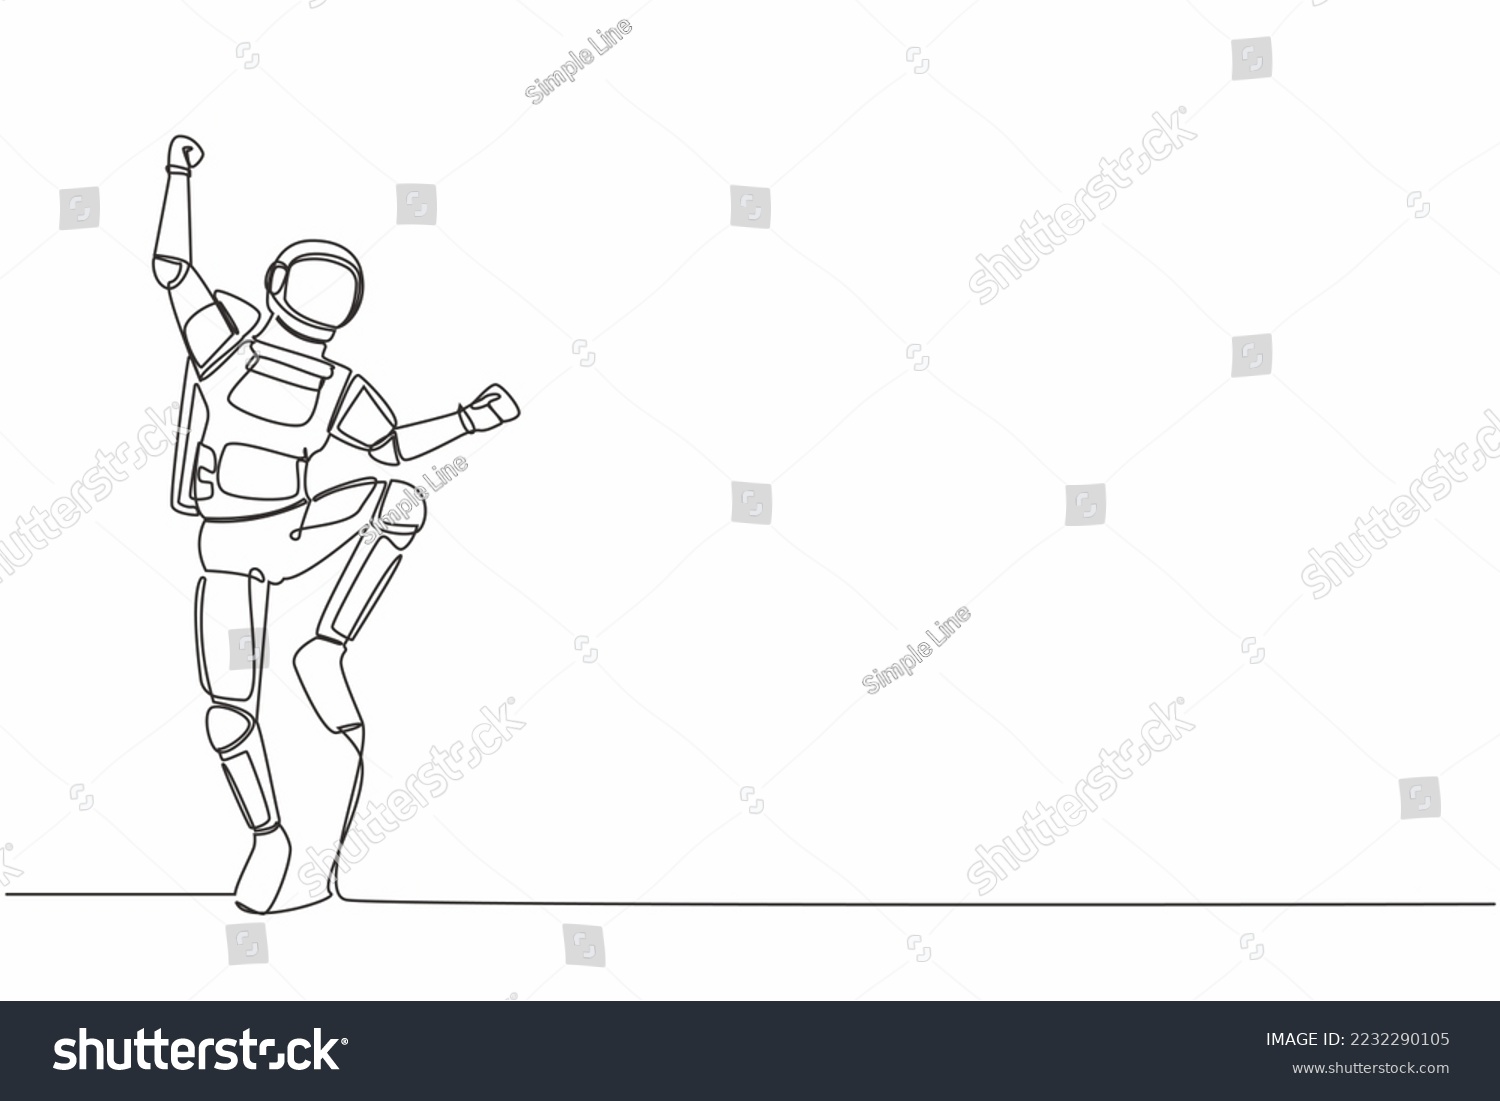 SVG of Single one line drawing of happy astronaut jump with folds one leg and raises one hand. Winning spaceship business project. Cosmic galaxy space. Continuous line draw graphic design vector illustration svg